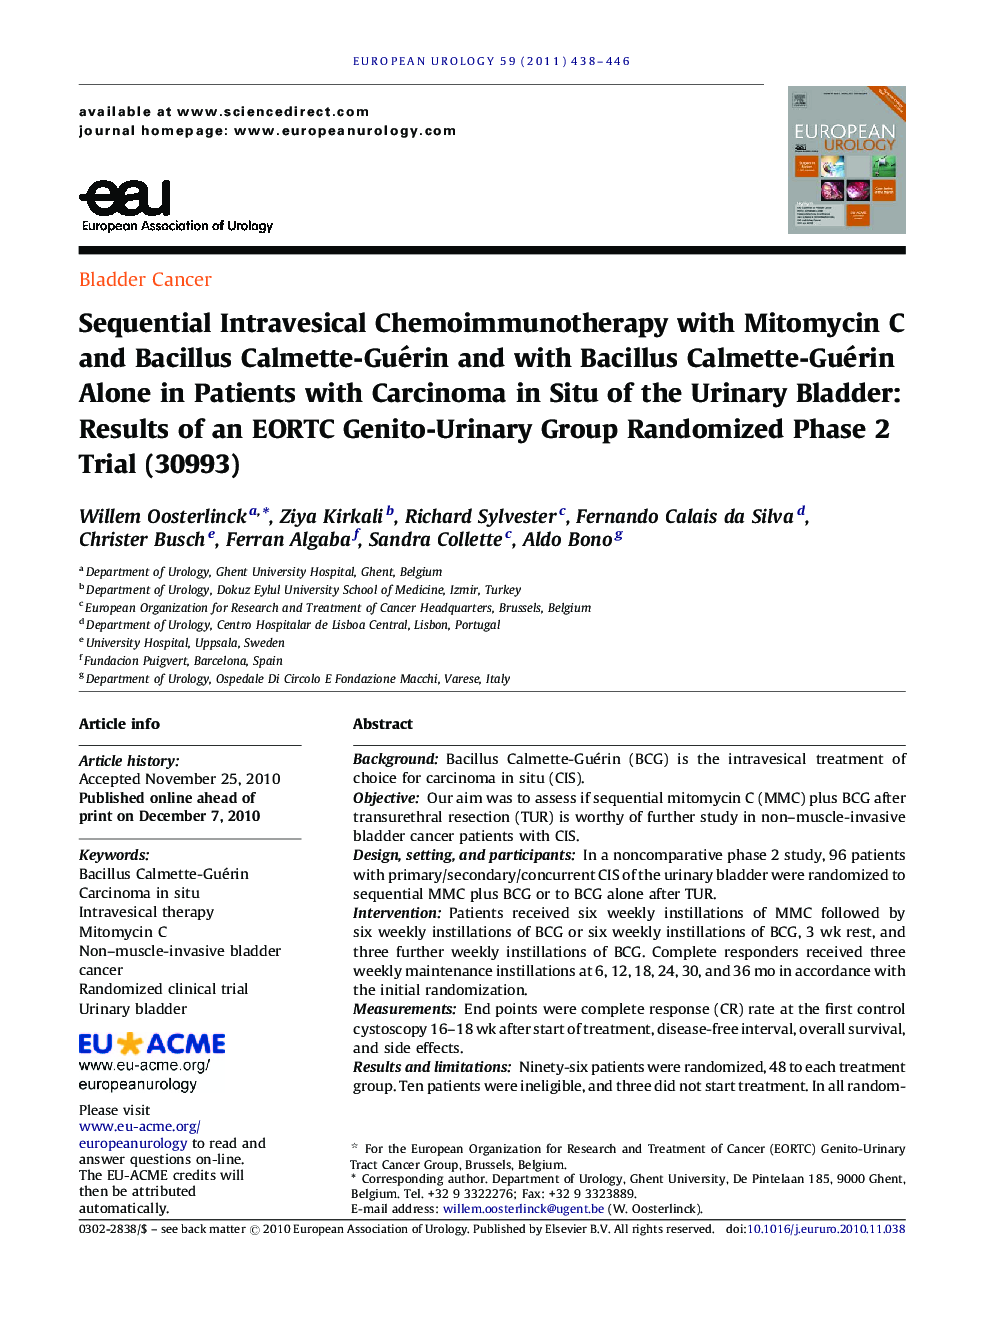 Sequential Intravesical Chemoimmunotherapy with Mitomycin C and Bacillus Calmette-Guérin and with Bacillus Calmette-Guérin Alone in Patients with Carcinoma in Situ of the Urinary Bladder: Results of an EORTC Genito-Urinary Group Randomized Phase 2 Trial